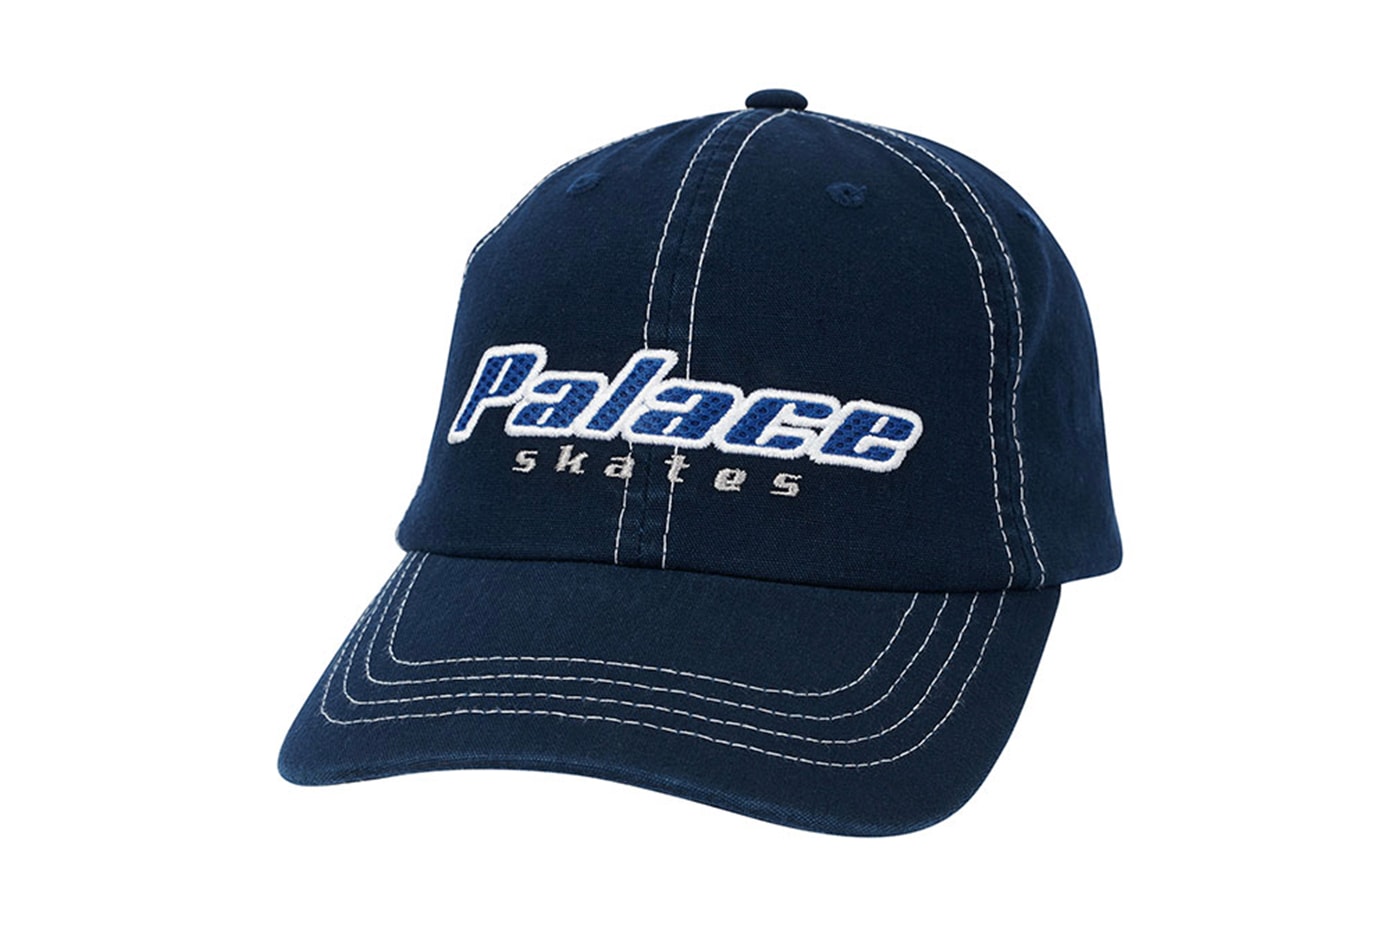 Palace Fall 2020 Hats Caps beanies collection release info